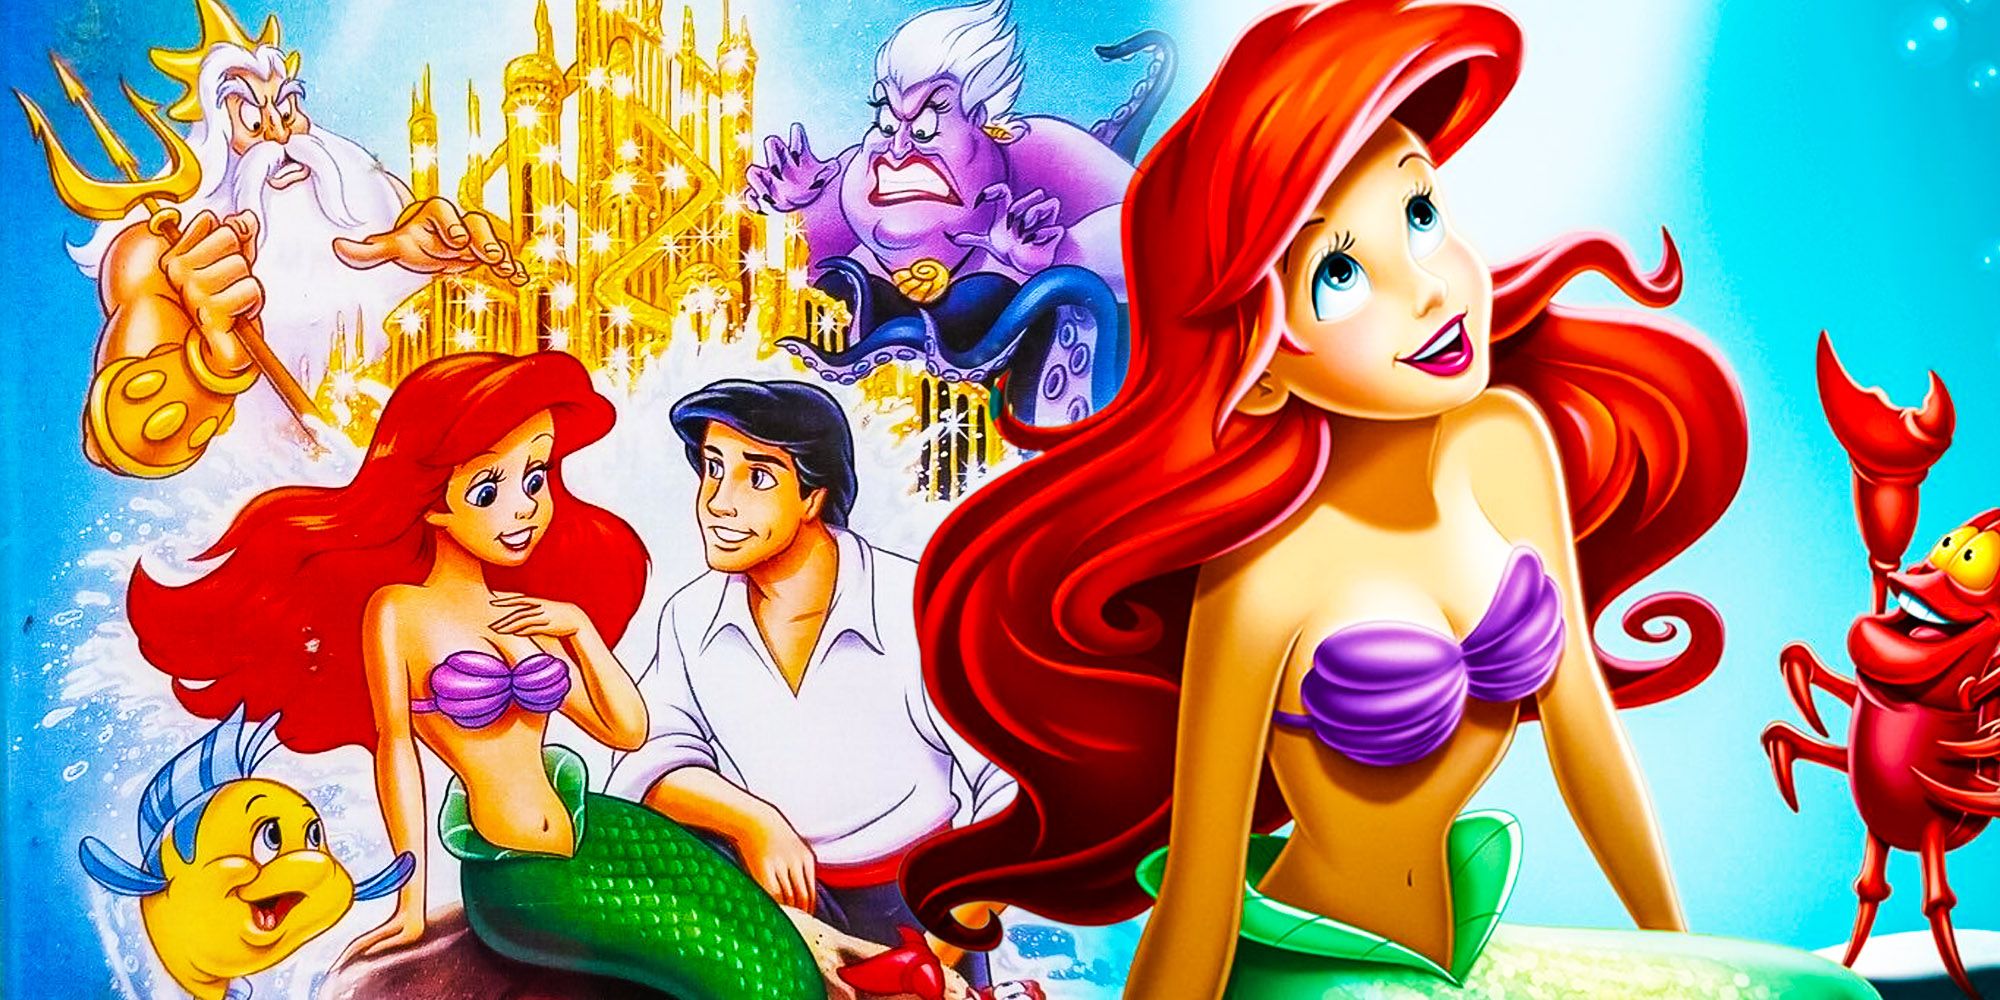 Why The Little Mermaid's 1989 VHS Cover Was Banned Binfer